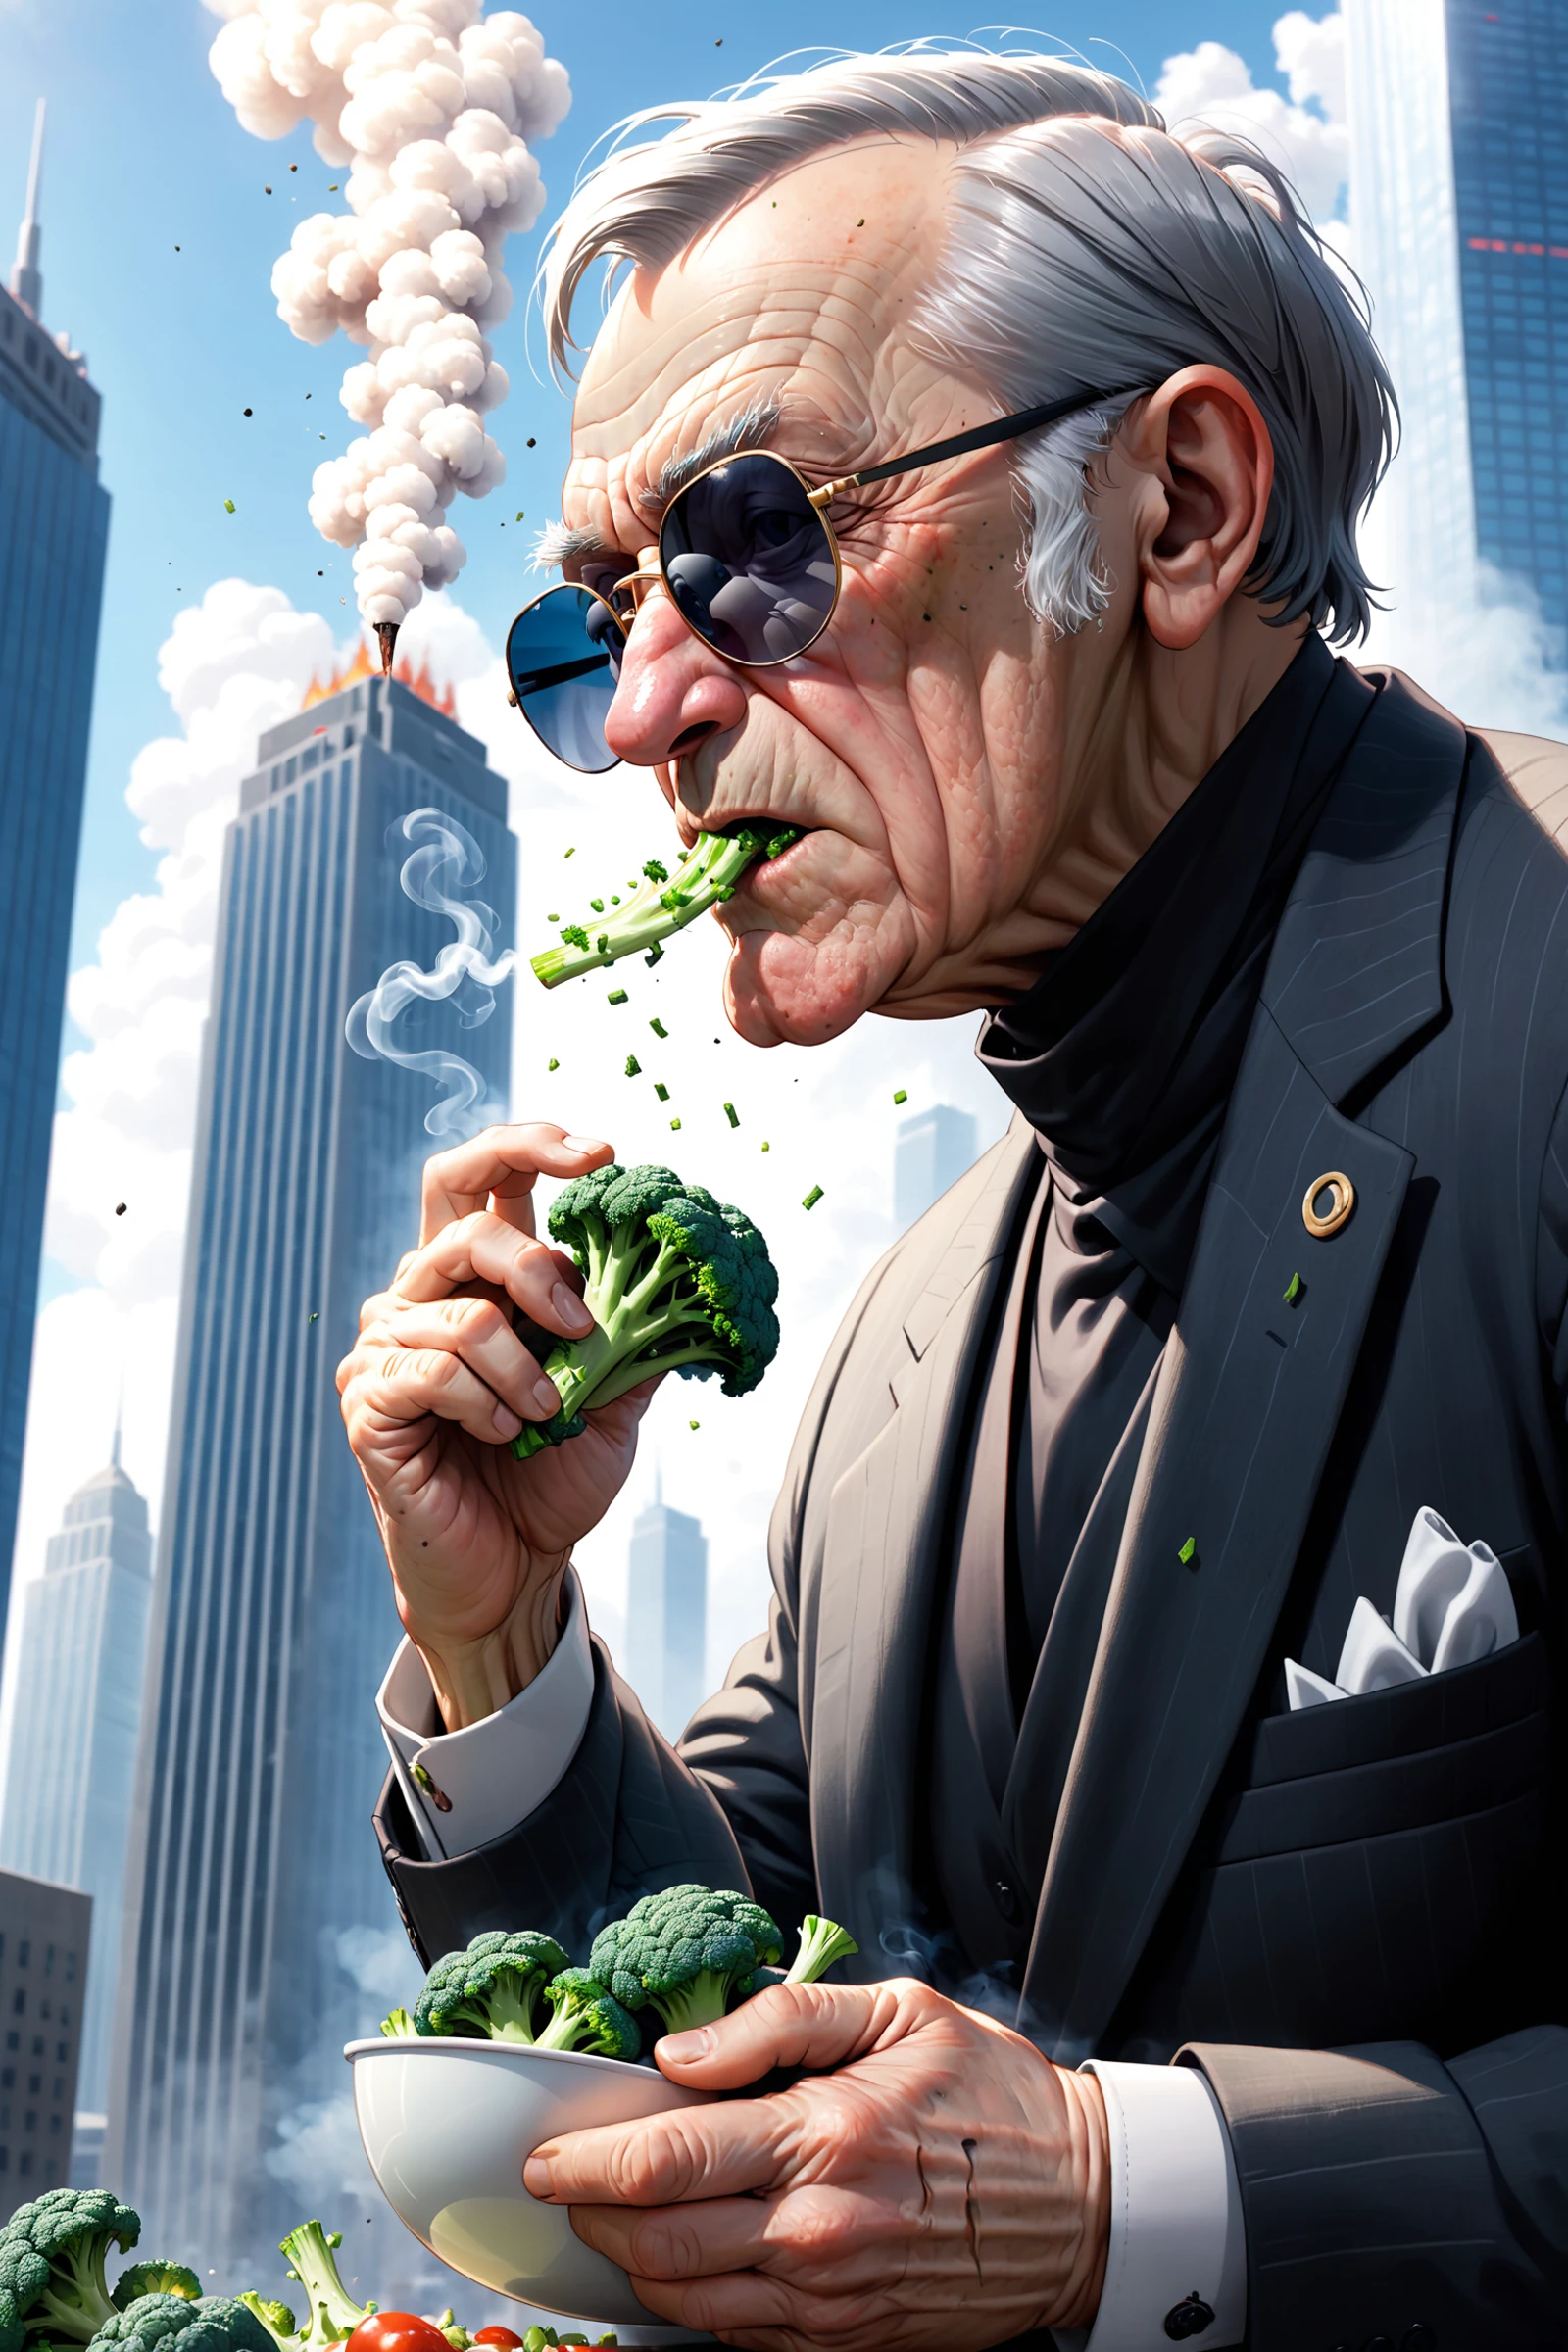 realistic, photo, old man eating broccoli, smoke, sunglasses, skyscraper, from side, cinematic